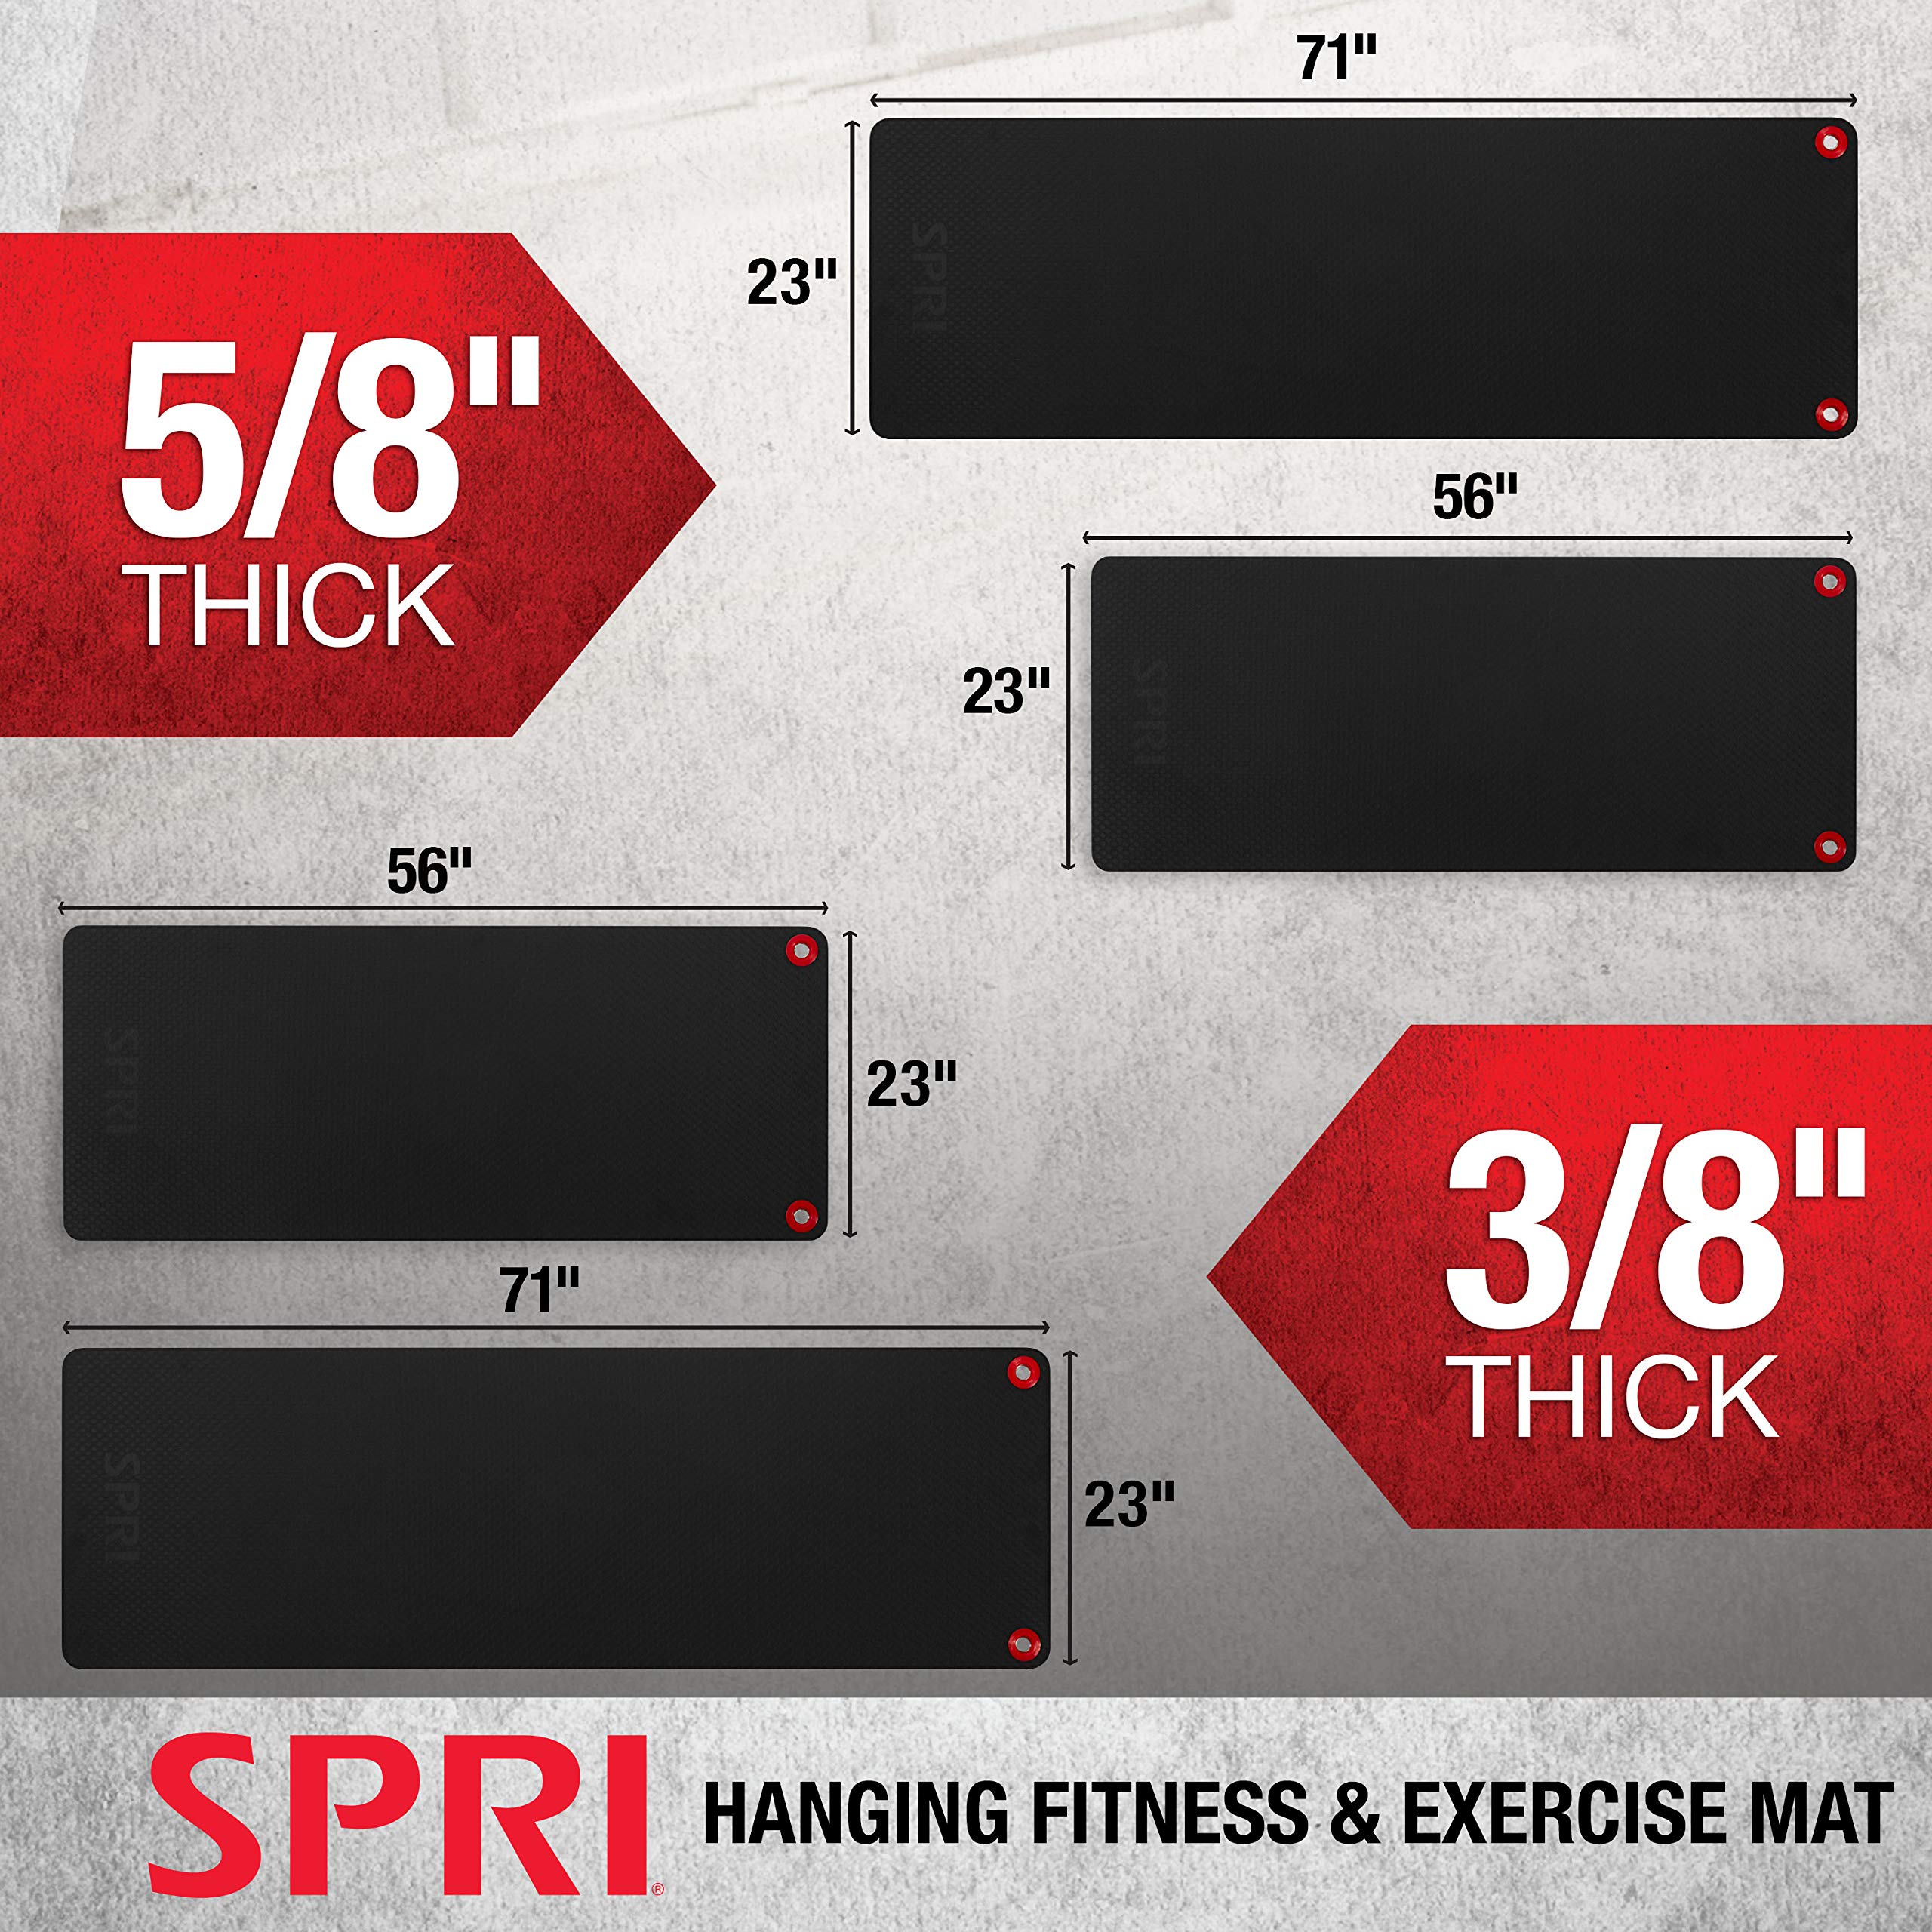 SPRI Hanging Exercise Mat, Fitness & Yoga Mat for Group Fitness Classes, Commercial Grade Quality with Reinforced Holes